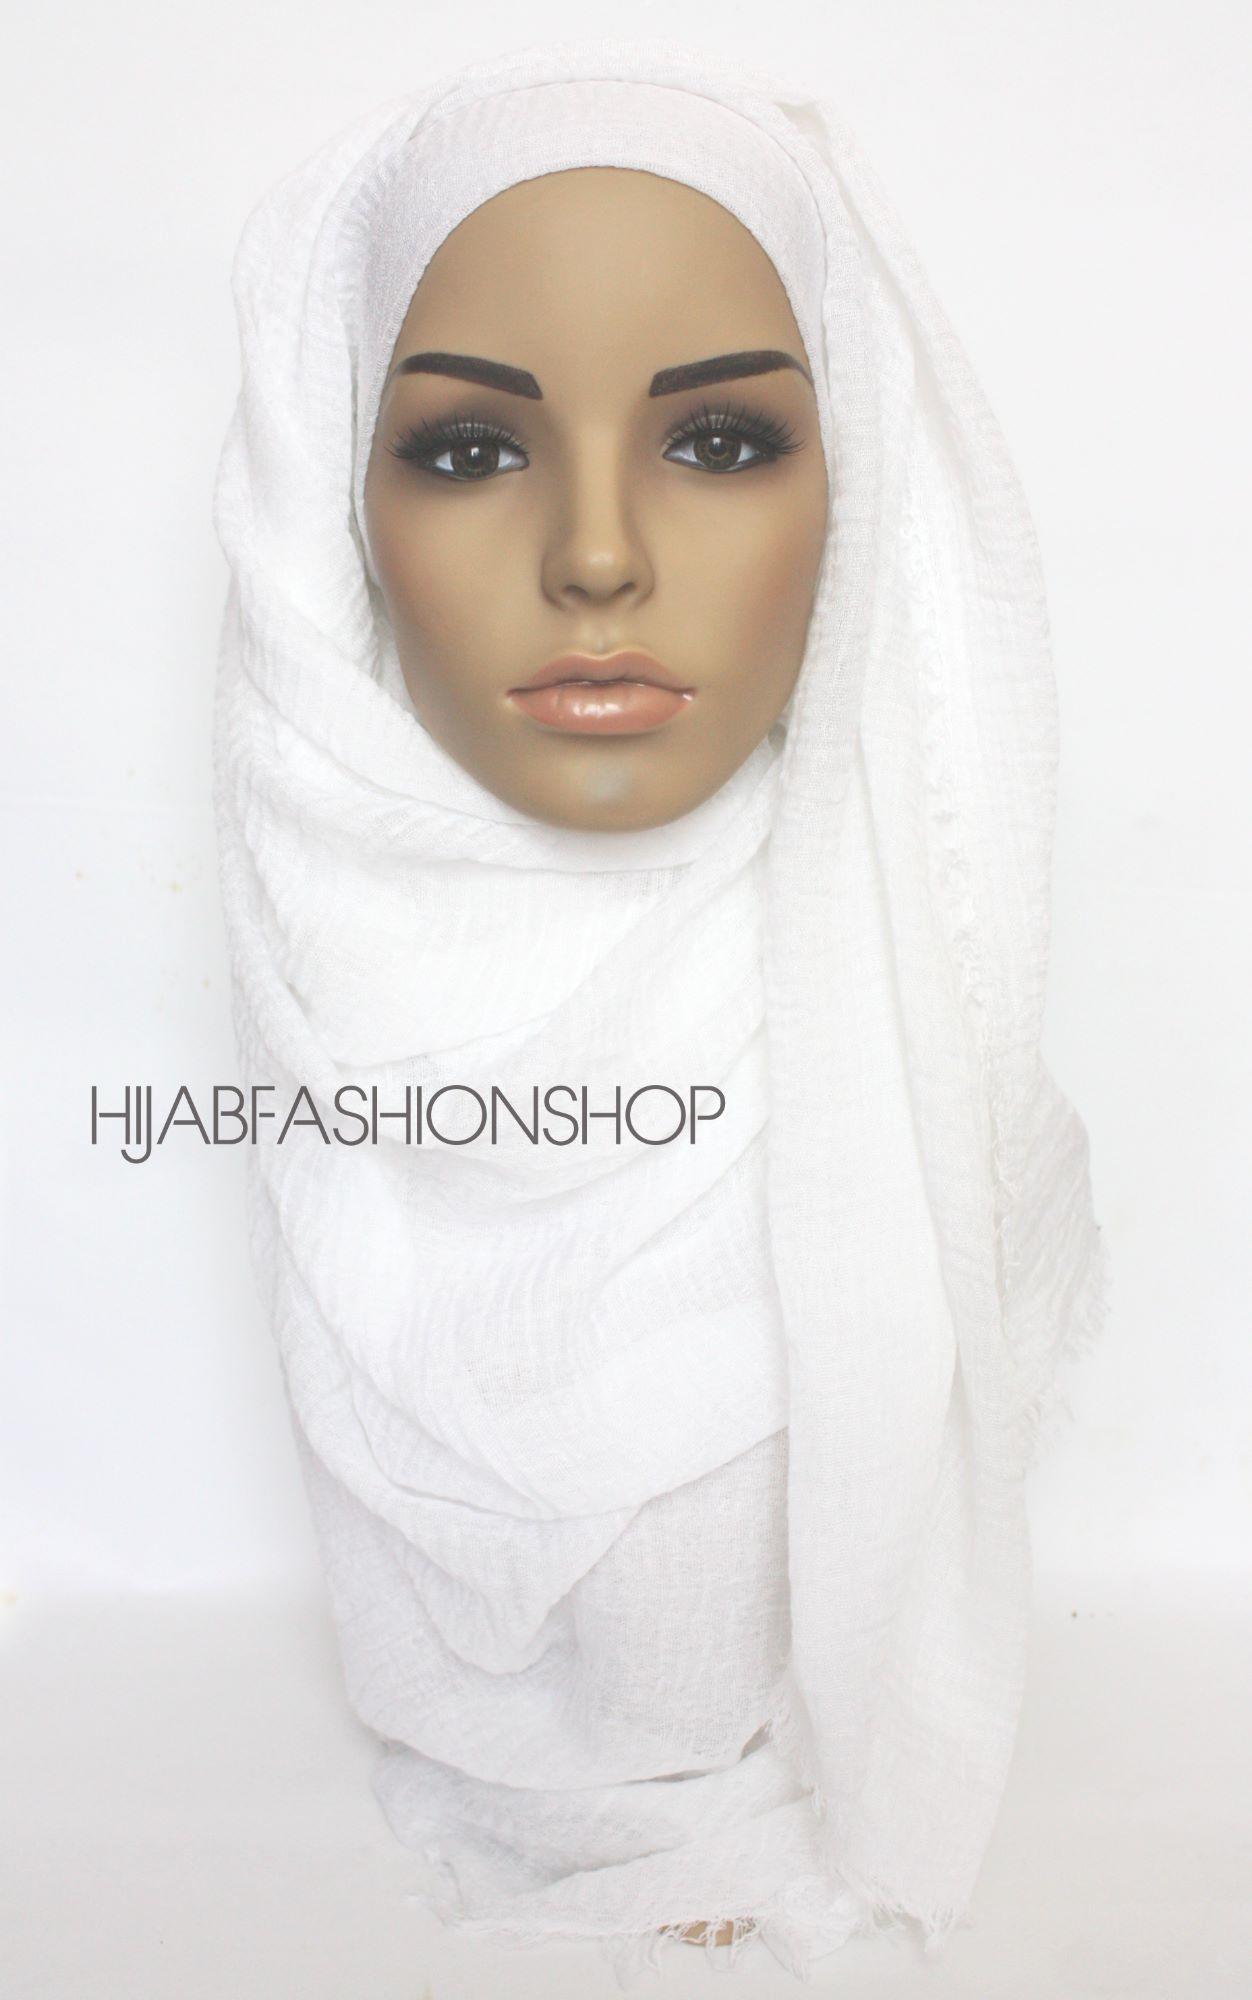 White Snow Army Green Premium Crimple Crimp Hijab Scarf with Frayed Edges